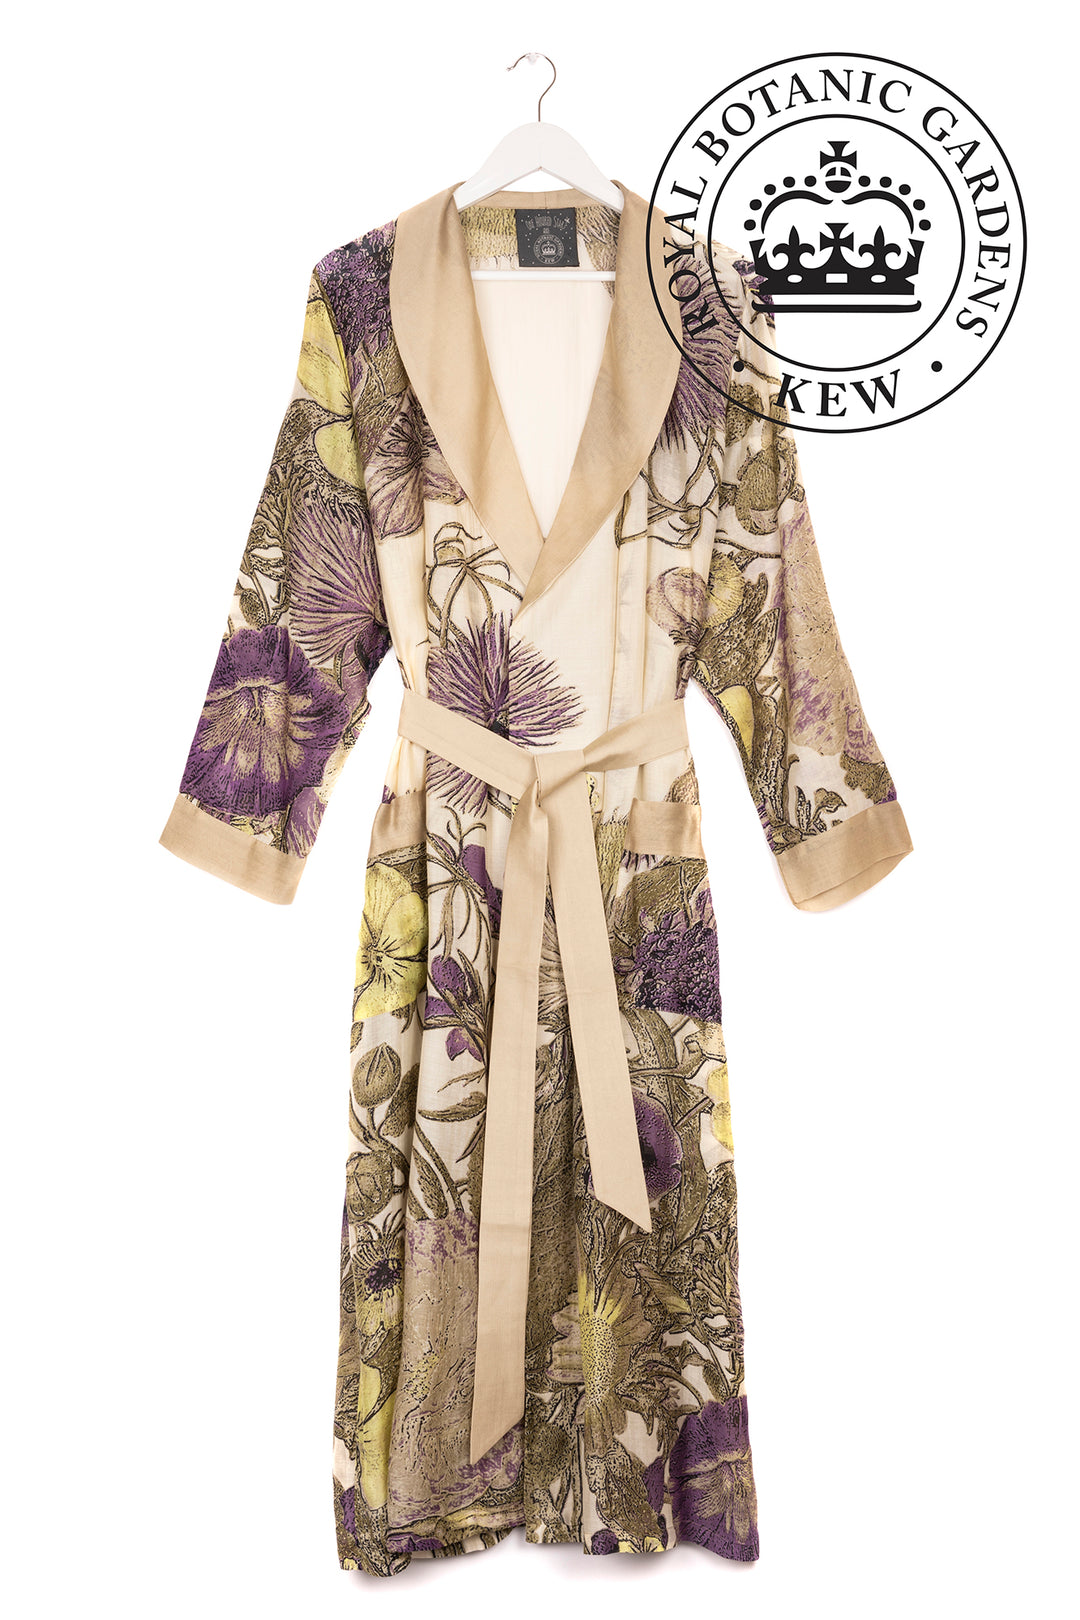 Thistle Purple Gown- This gown is perfect as a luxurious house coat or for layering as a chic accessory to your favourite outfit.